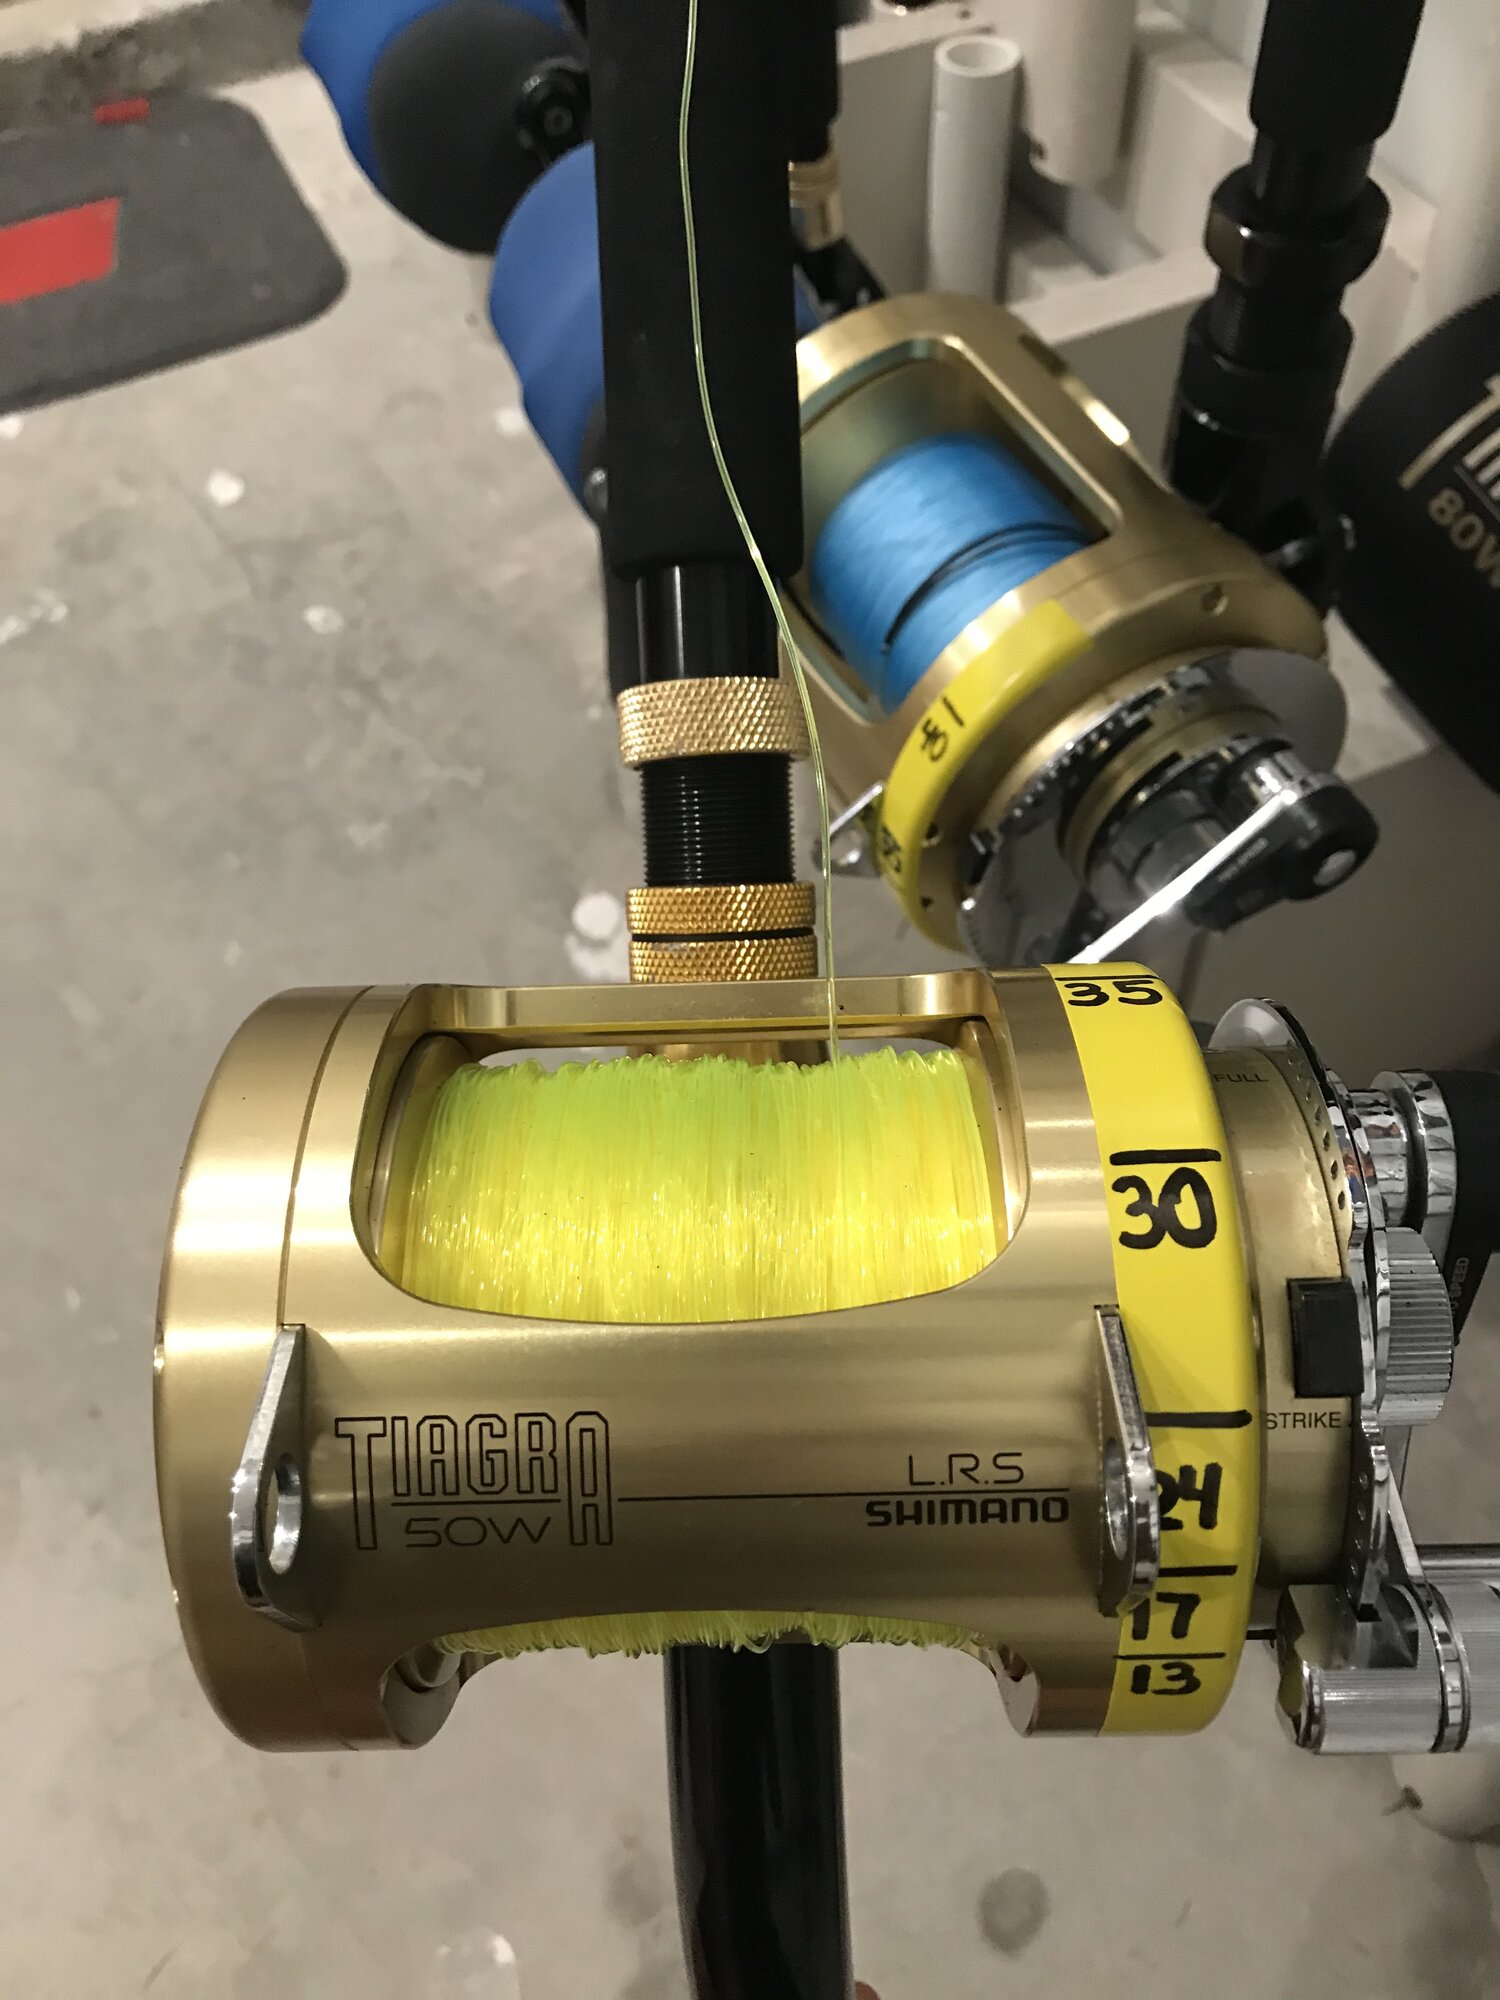 Trolling Rods and Reels explained 